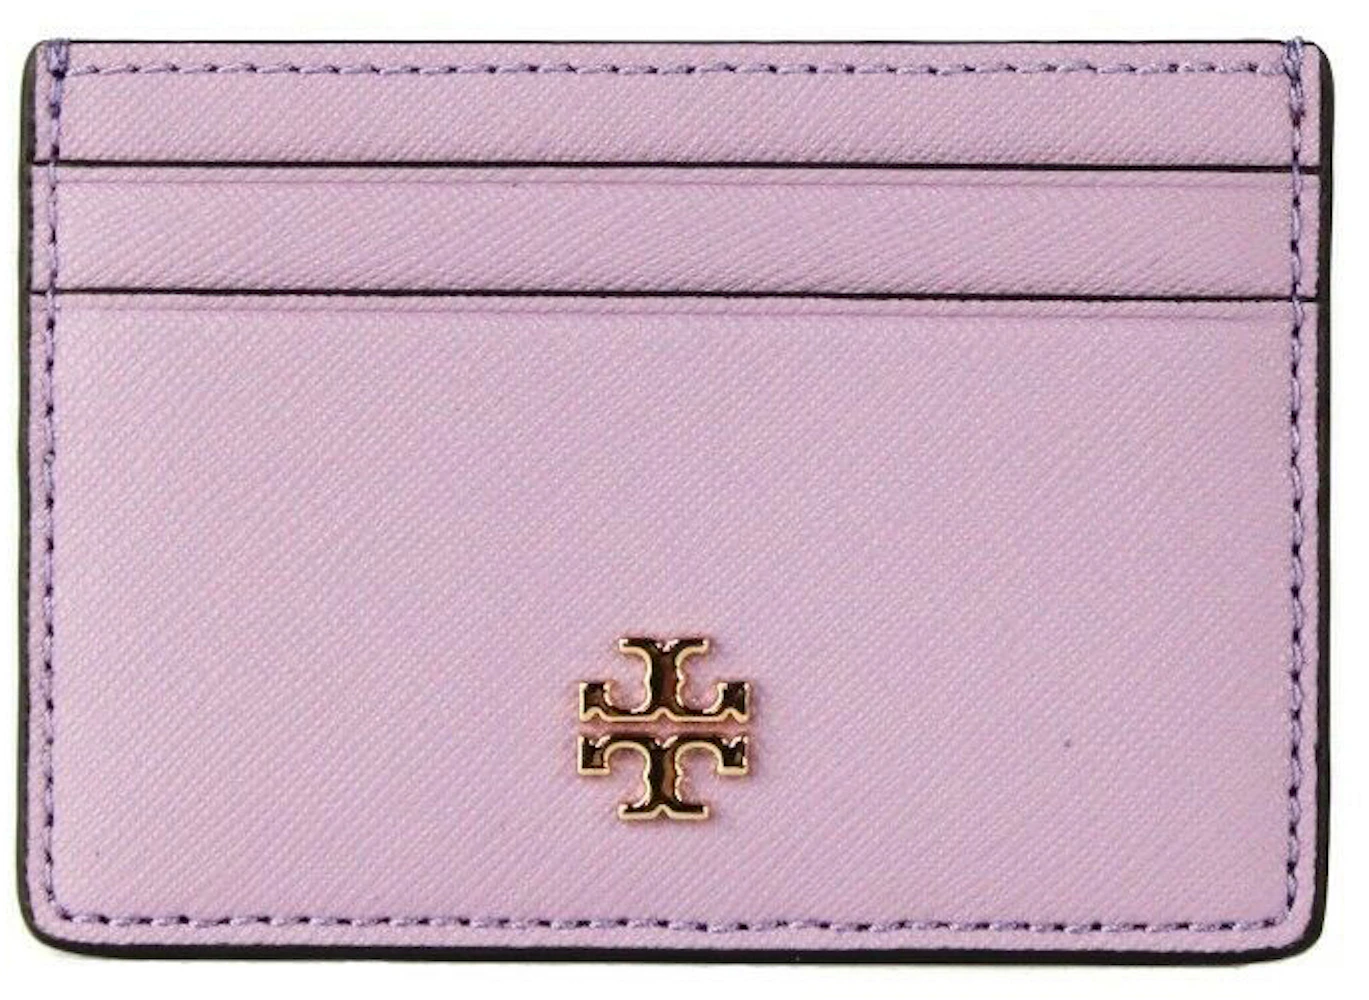 Tory Burch Emerson Slim Cardcase Dusty Violet in Leather with Gold-tone - US